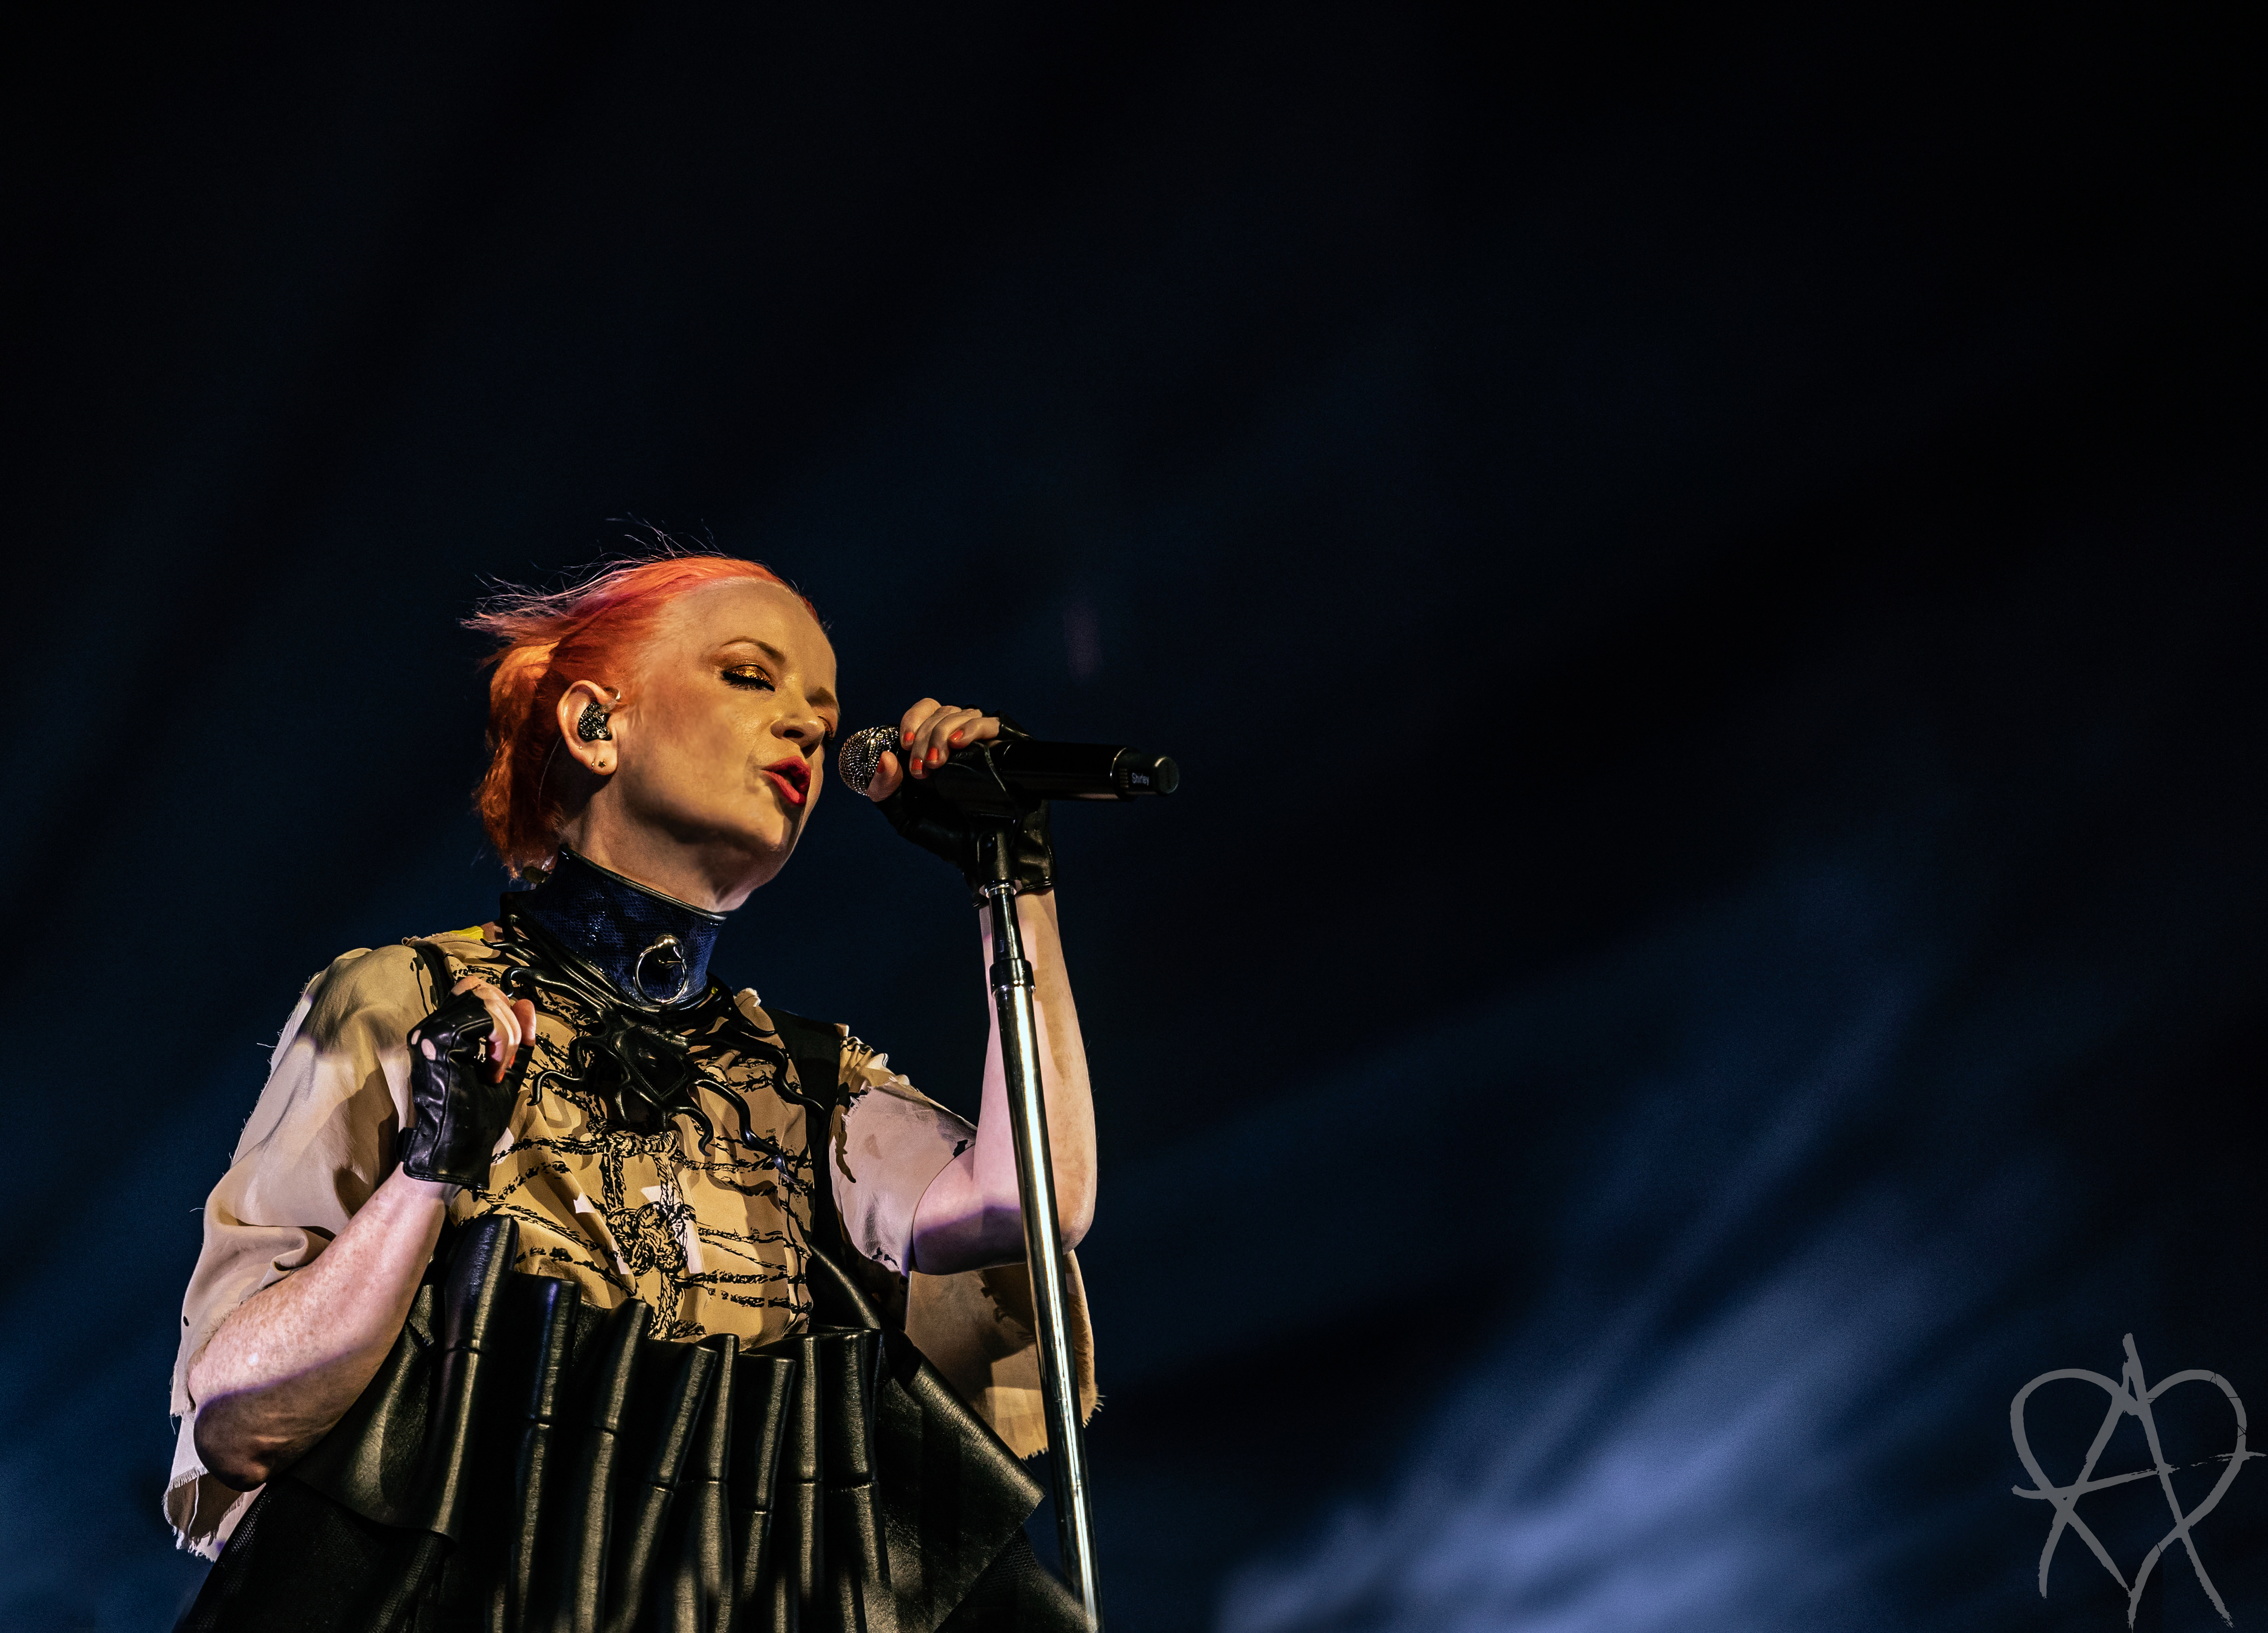 GARBAGE BRINGS ‘NO GODS NO MASTERS’ TOUR TO WILKES-BARRE